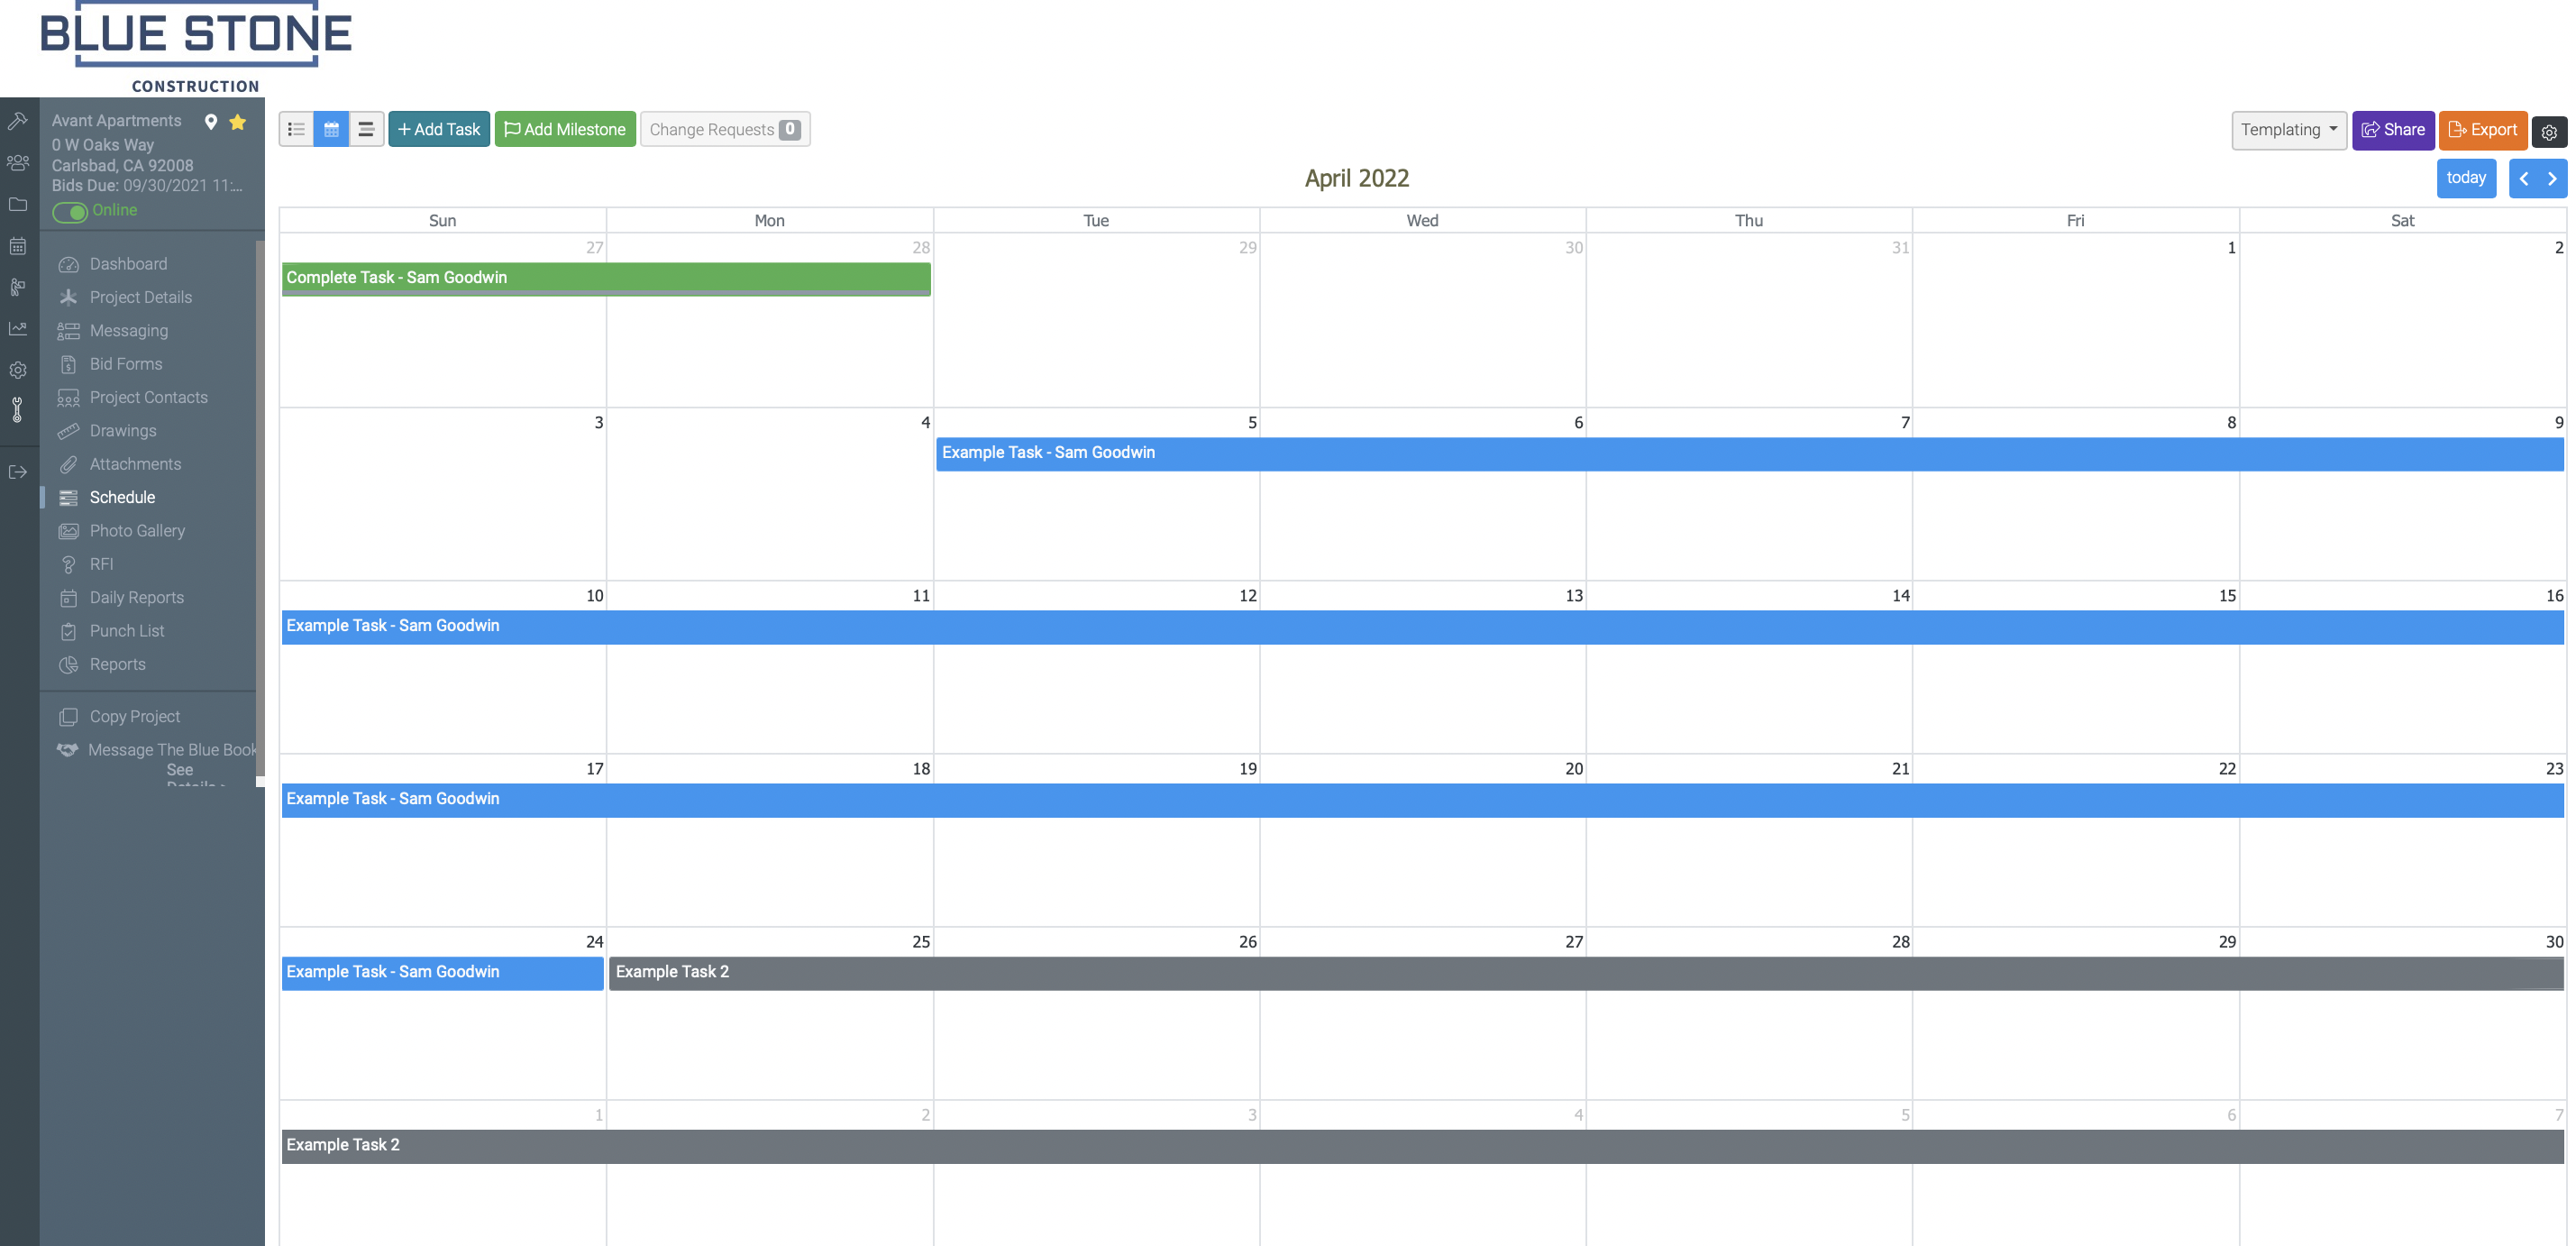 Scheduling, task assignment and dependencies
